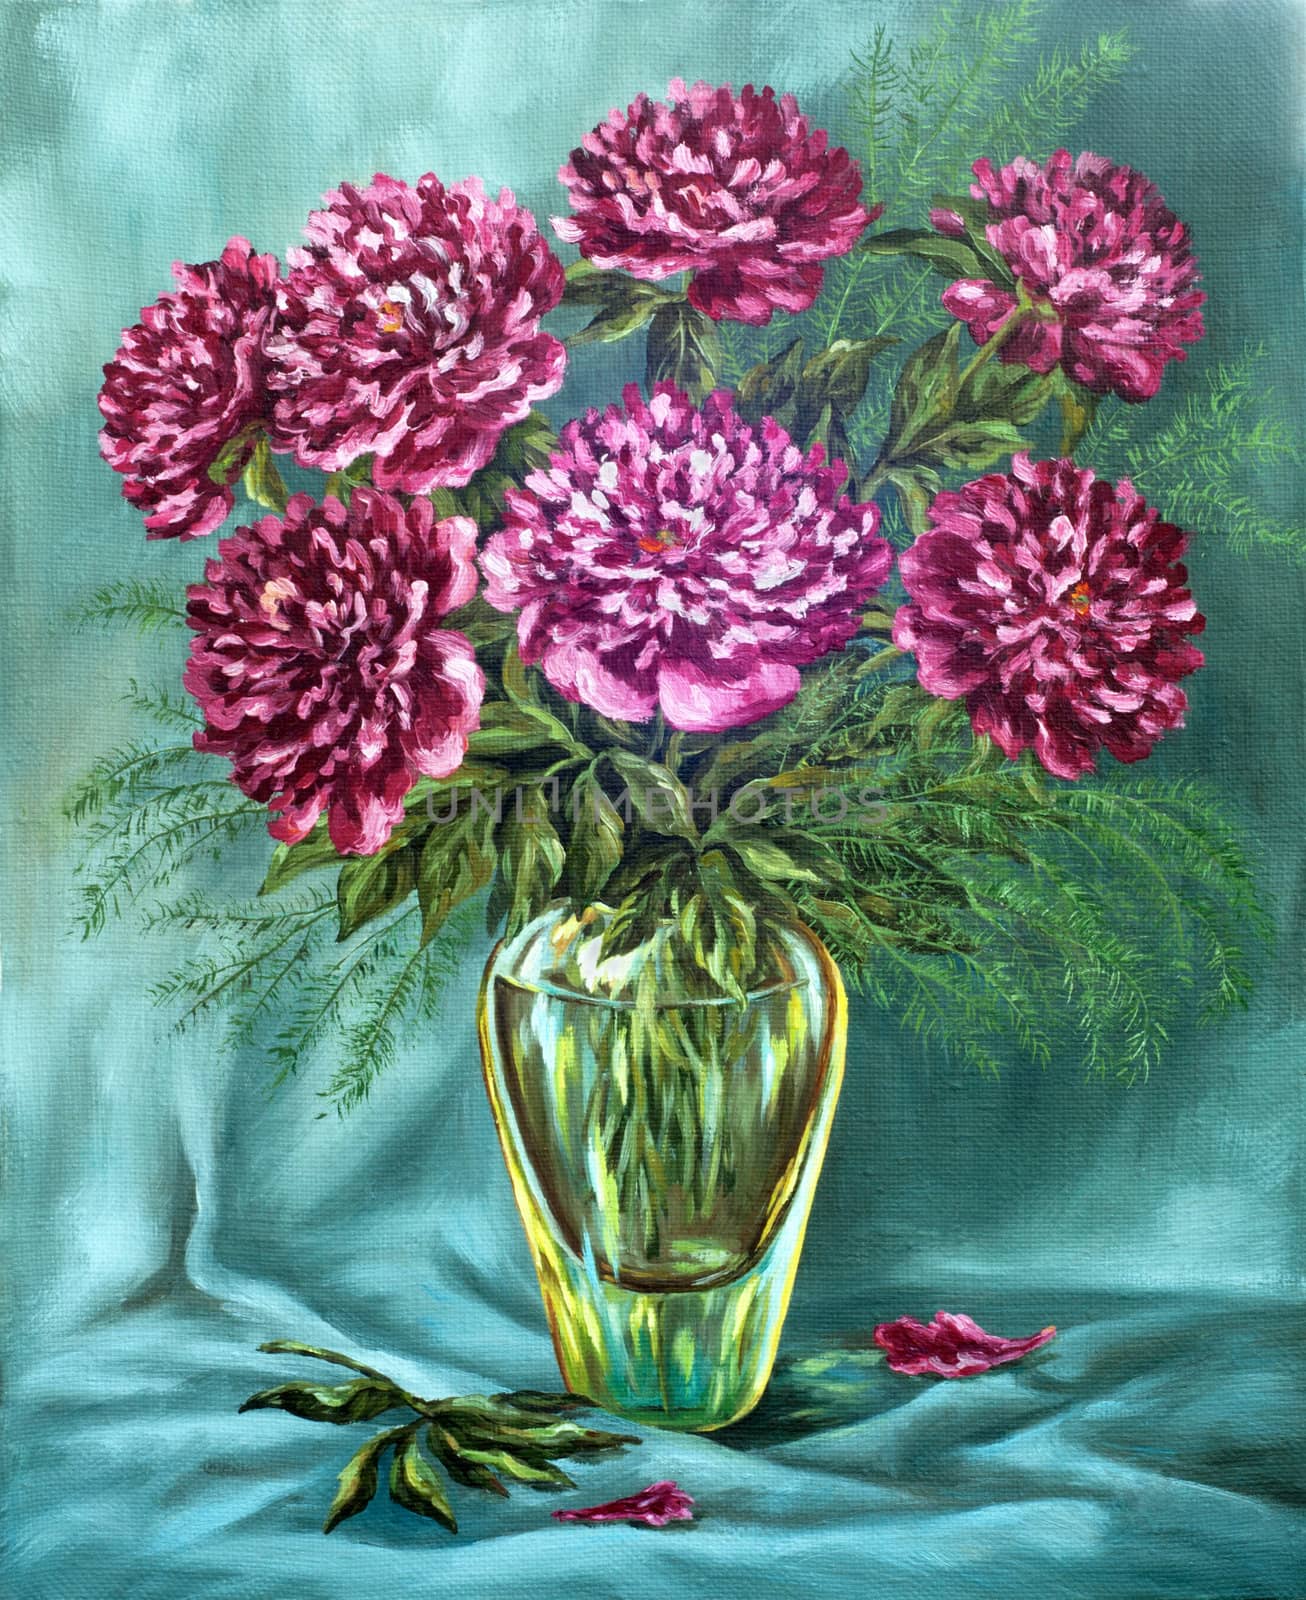 Peonies in a glass vase by alexcoolok